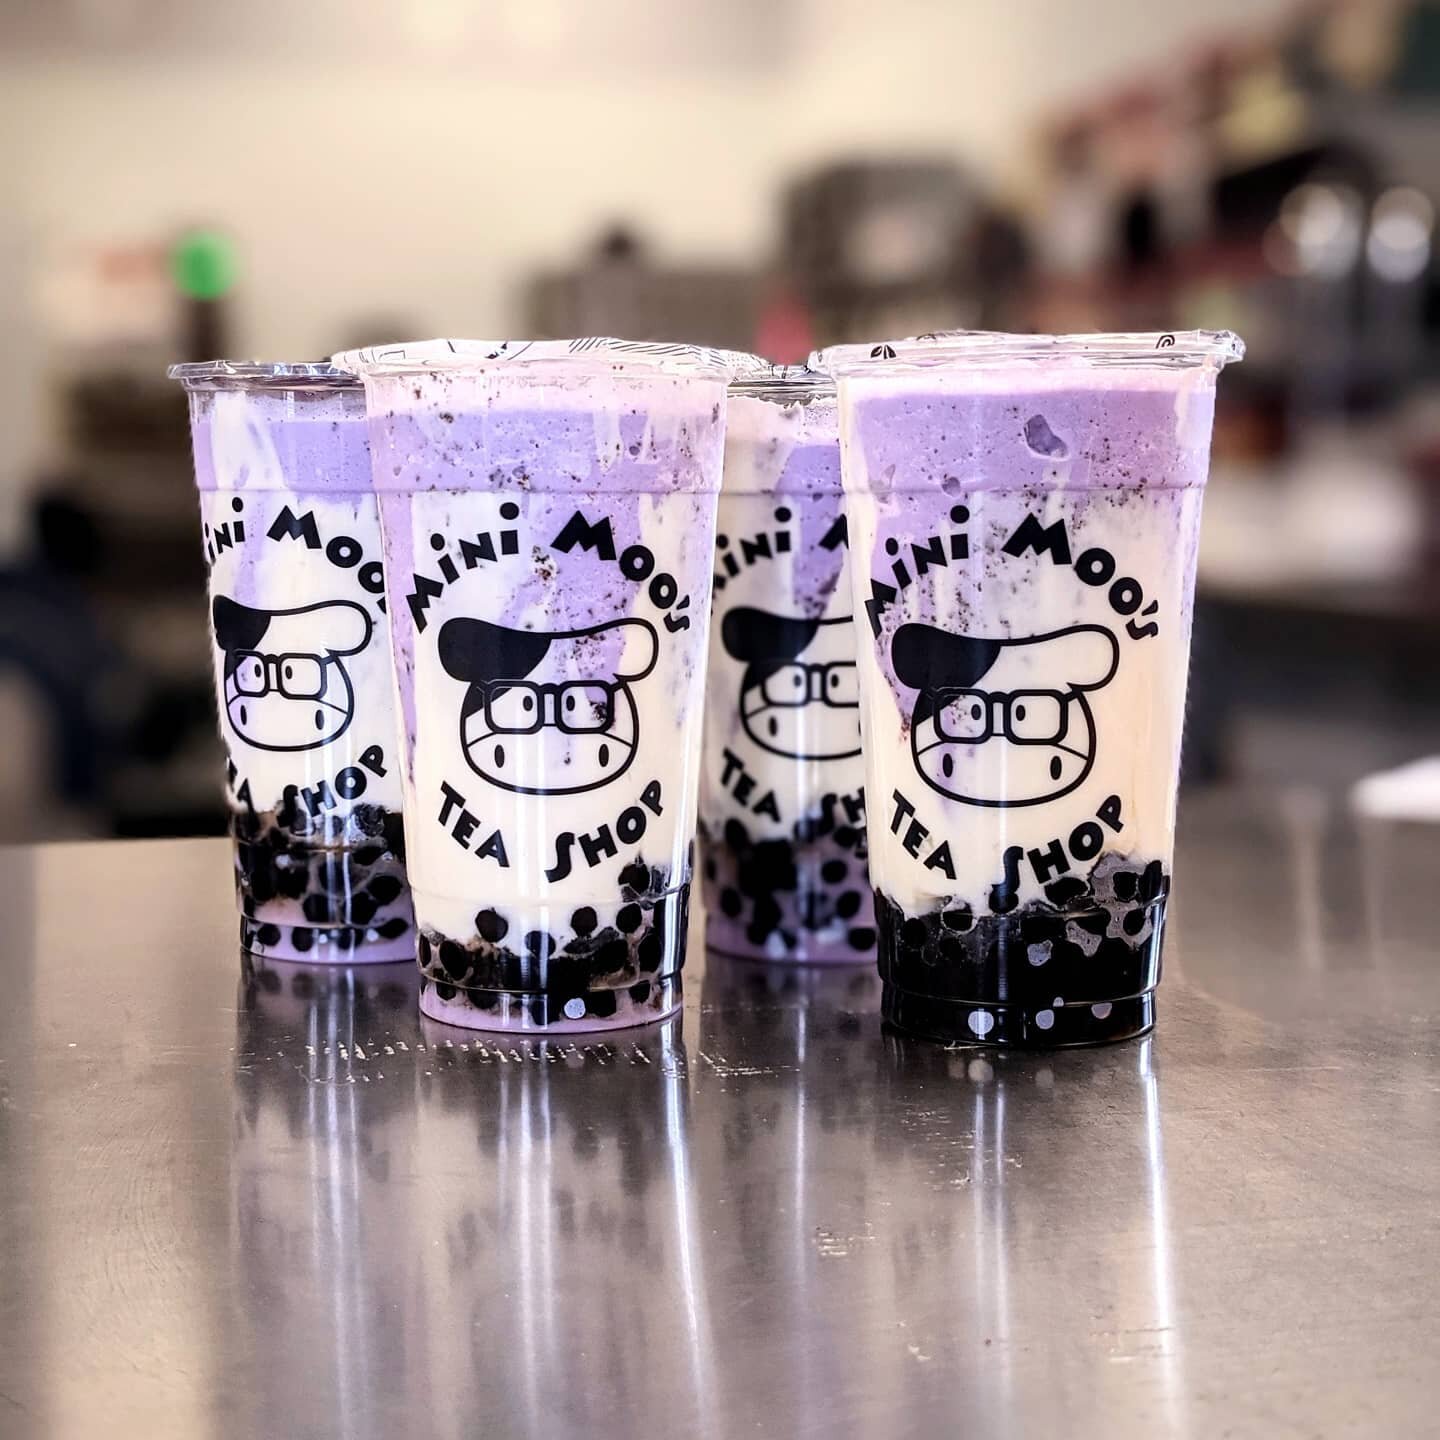 IT'S NATIONAL BOBA DAY LADIES, GENTS AND ALL IN BETWEEN! 🧋🧋🧋🧋 How are you celebrating such an amazing holiday? We're here helping all you celebrate so don't forget to stop by your favorite local boba stop! 

#minimoosteashop #localbusiness #bobad